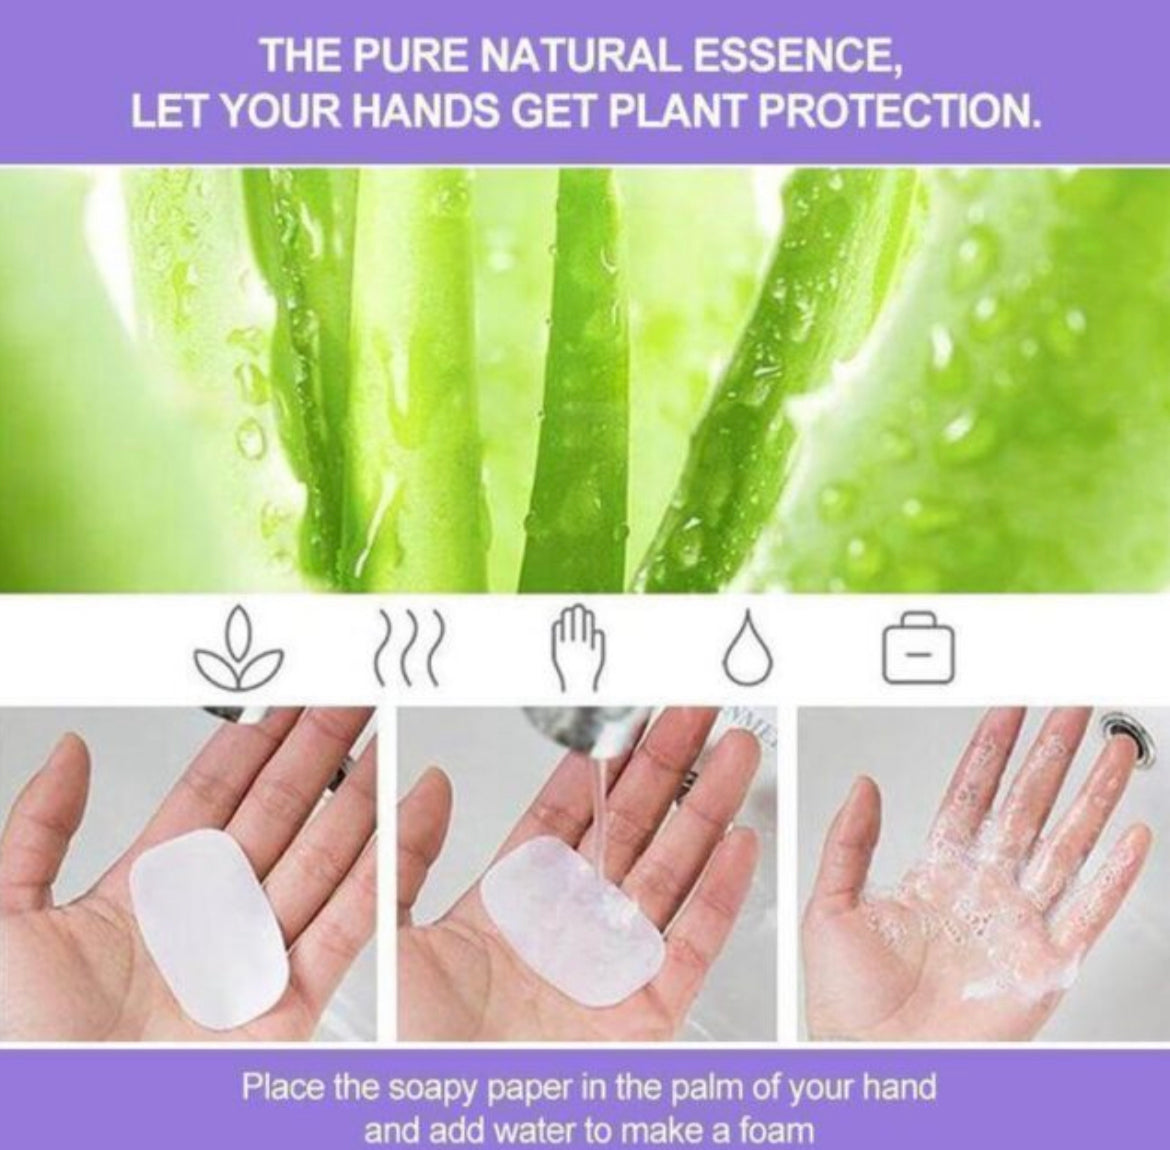 Portable Hand-Washing Soap Paper